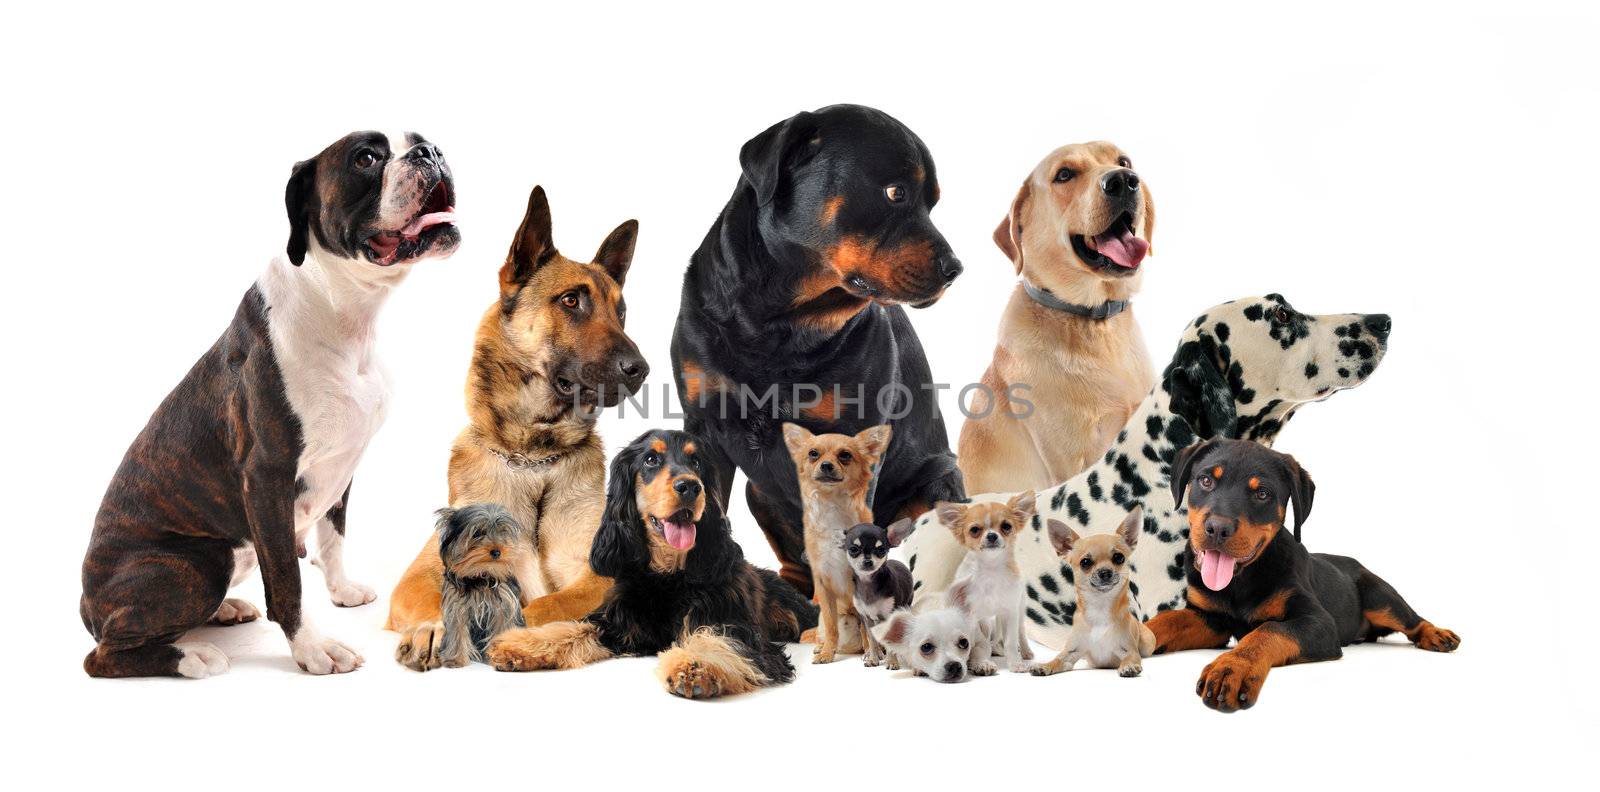  purebred  little and large dogs in a white background